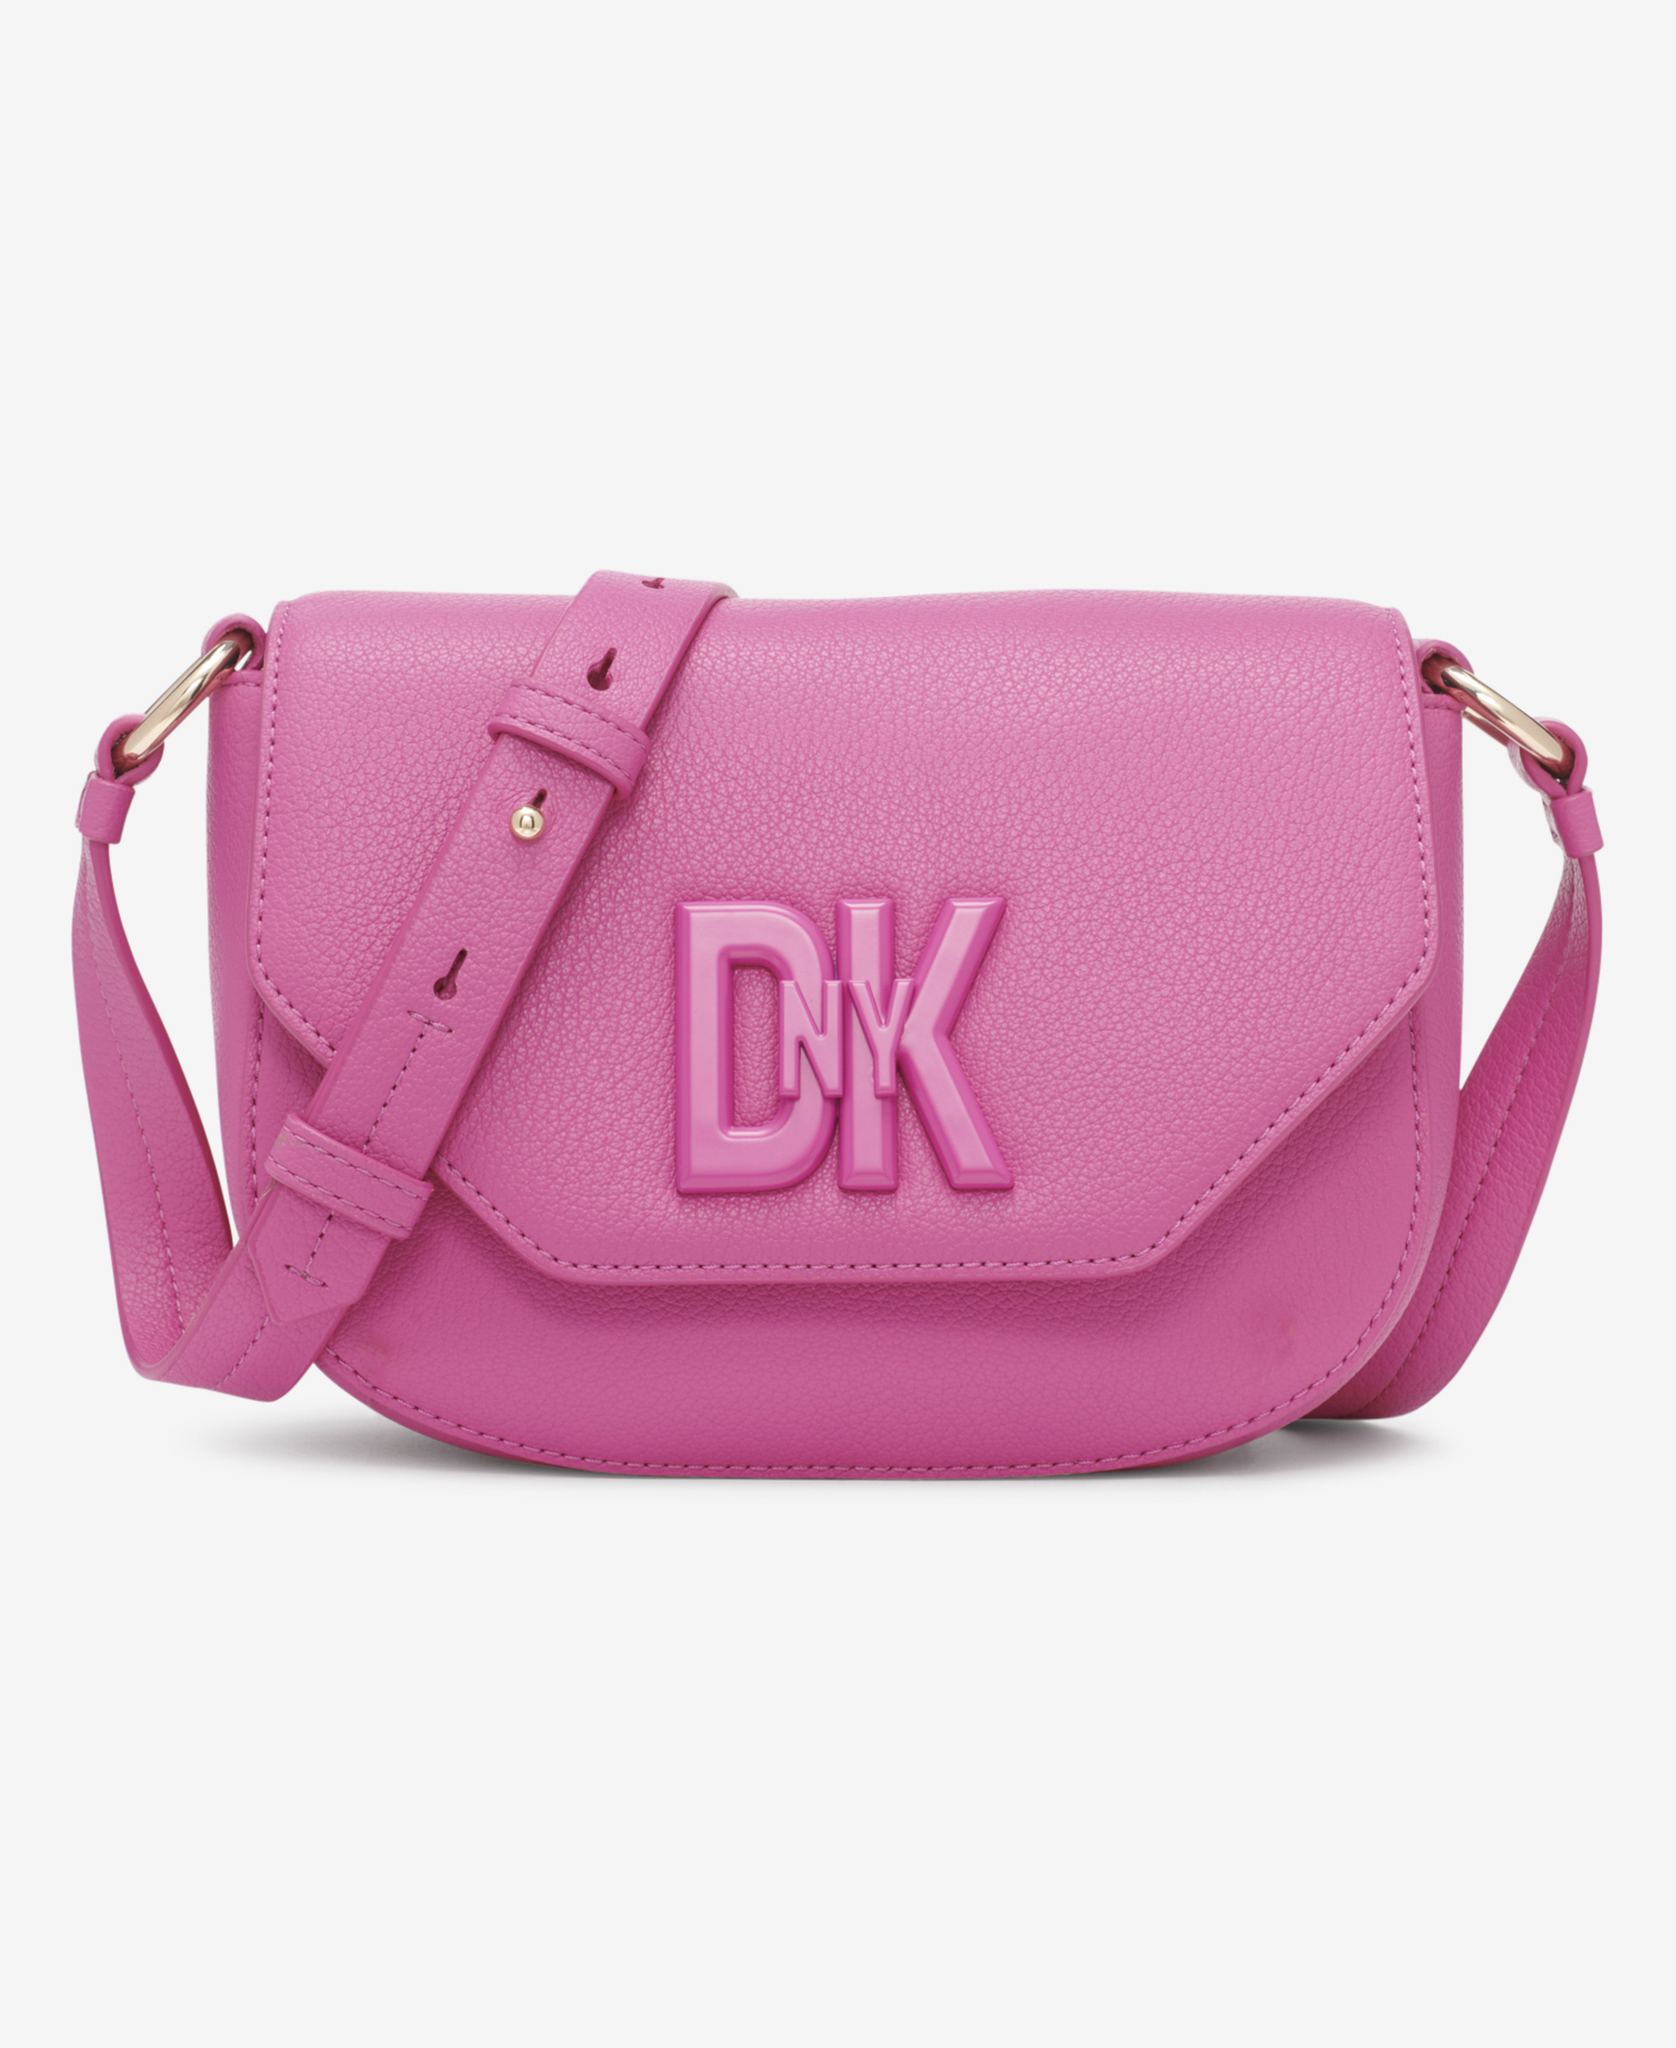 DKNY Seventh Avenue Small Flap Crossbody in Bright Pink